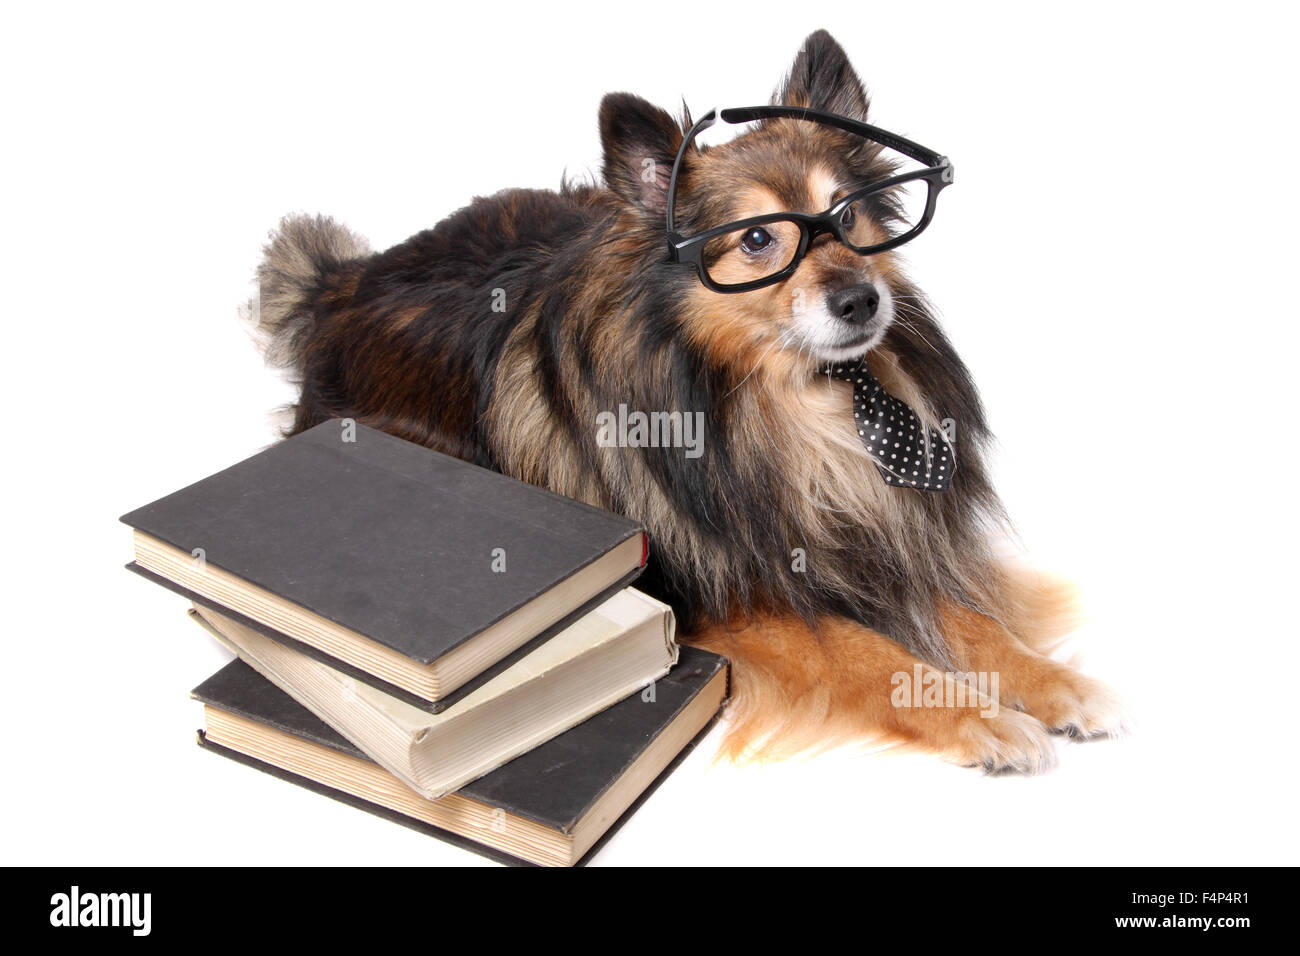 Sheltie or Shetland Sheepdog wearing a tie and black framed glasses laying by a pile of books, animal education concept Stock Photo